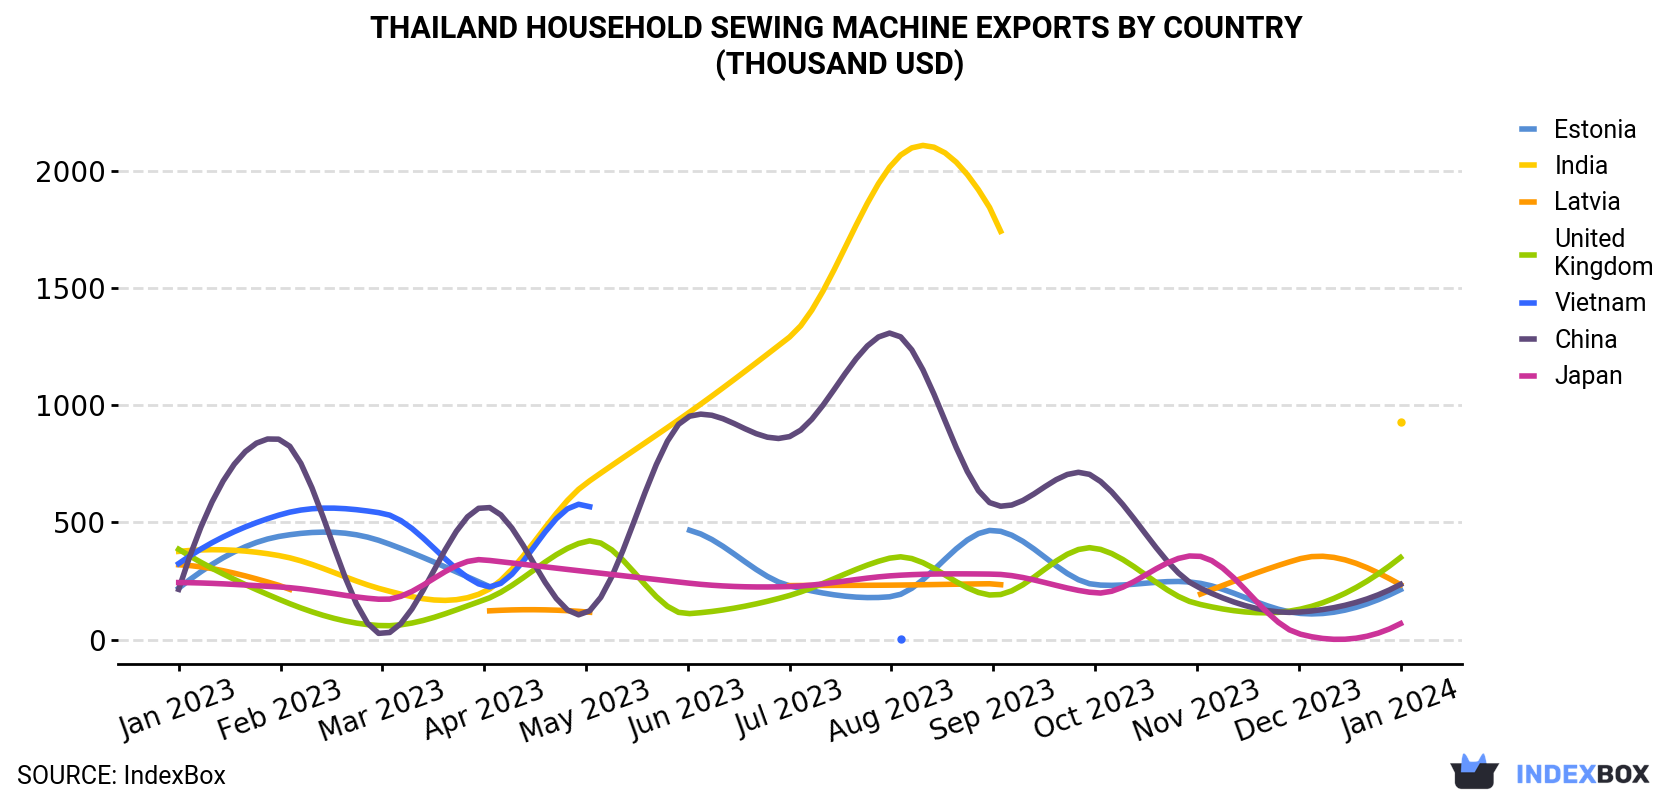 Thailand Household Sewing Machine Exports By Country (Thousand USD)